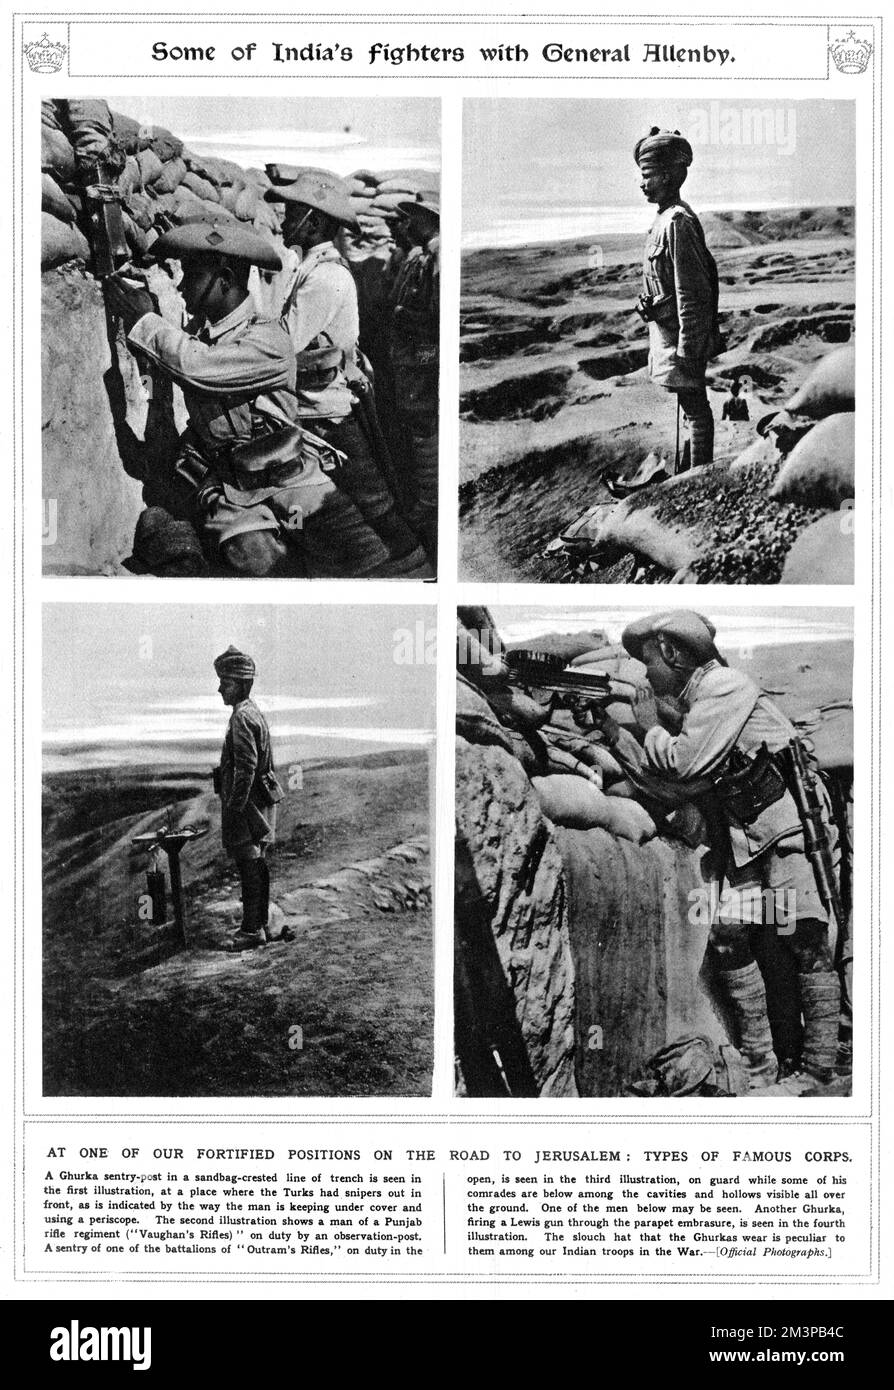 Photographs of Indian soldiers under General Allenby's command on the road to Jerusalem during World War I. Clockwise from top-left: a Gurkha sentry-post in a sandbag-crested line of trench; a man of the Punjab rifle regiment (Vaughan's Rifles) on duty by an observation post; a Gurkha firing a Lewis gun through the parapet; and a sentry of one of the battalions of 'Outram Rifles' on duty in the open     Date: 1917 Stock Photo